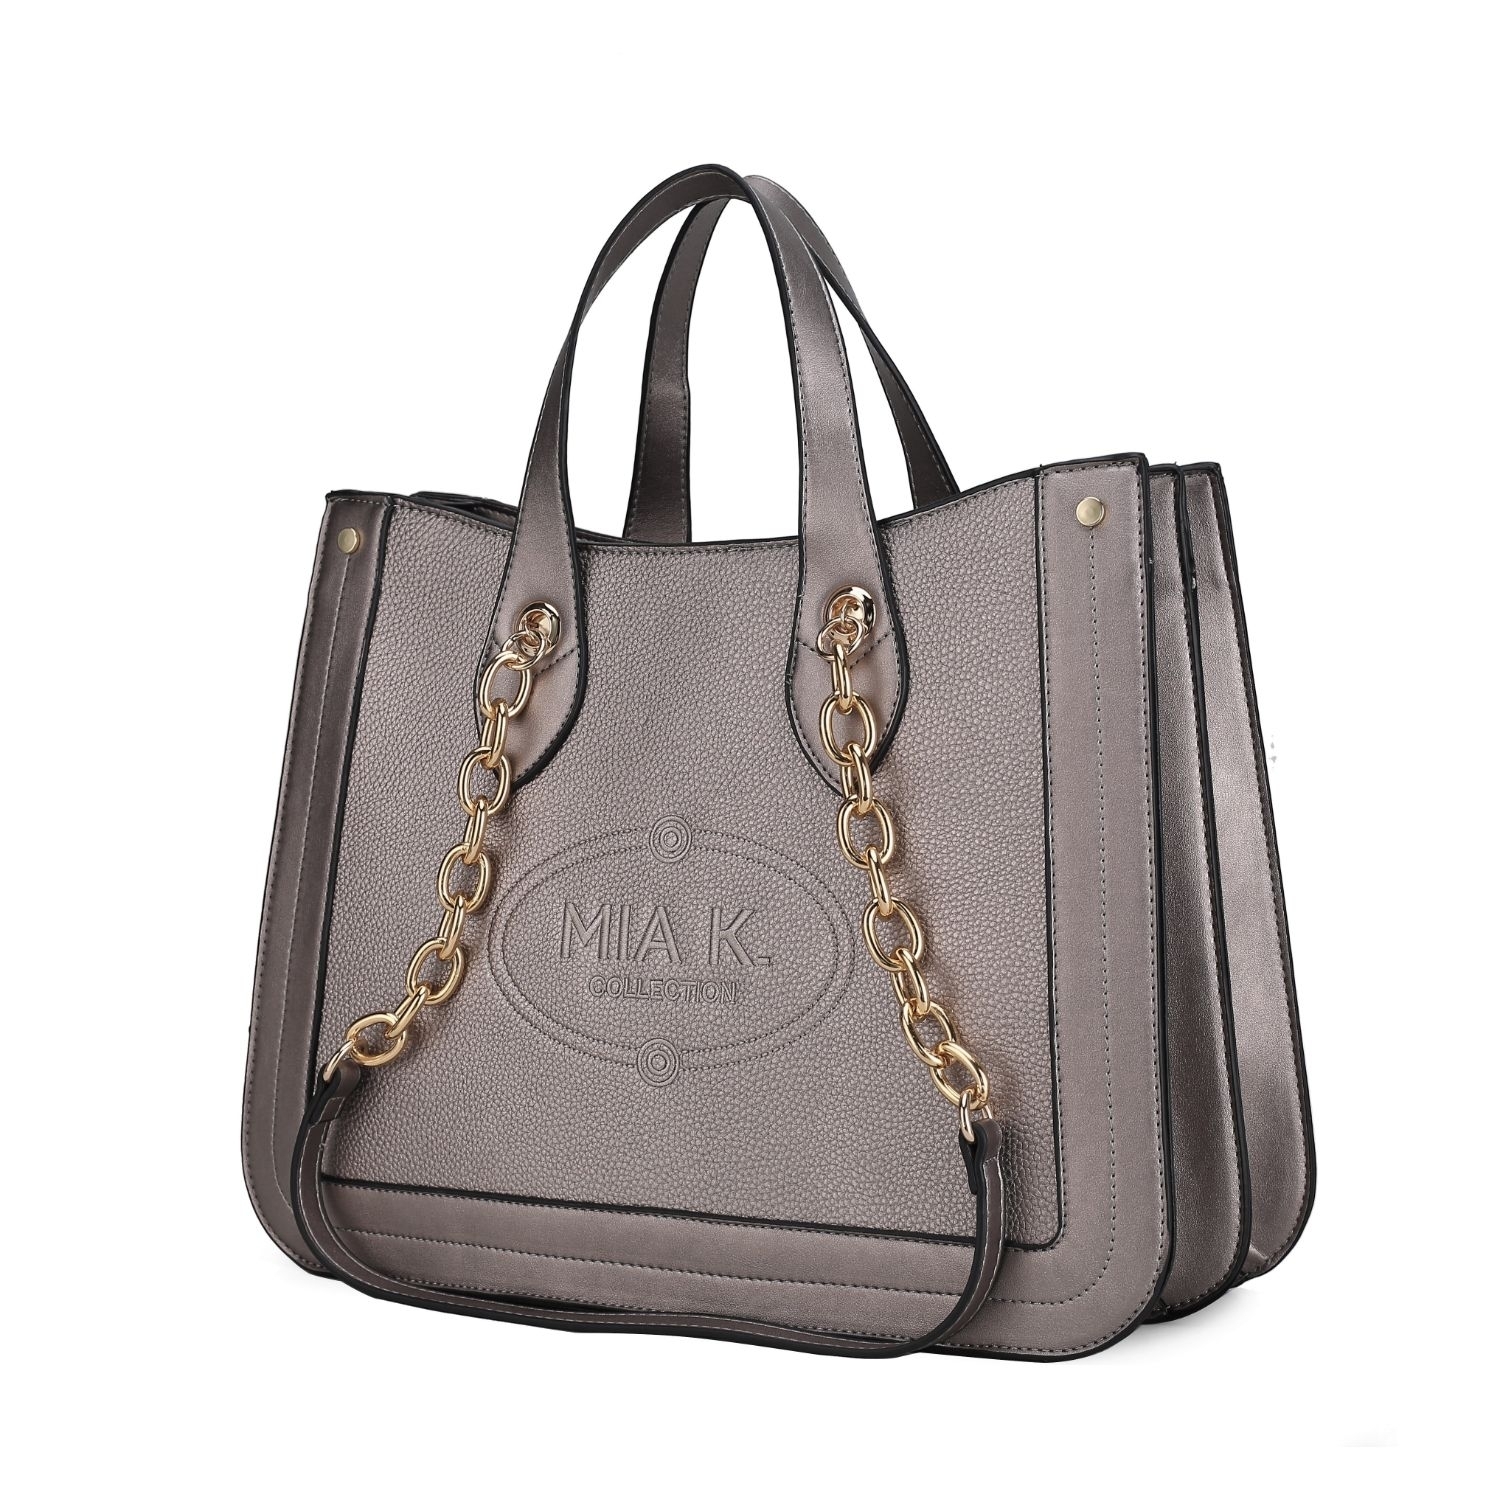 MKF Collection Stella Vegan Leather Women's Handbag Double Compartment Oversize Classy Tote By Mia K. - Pewter